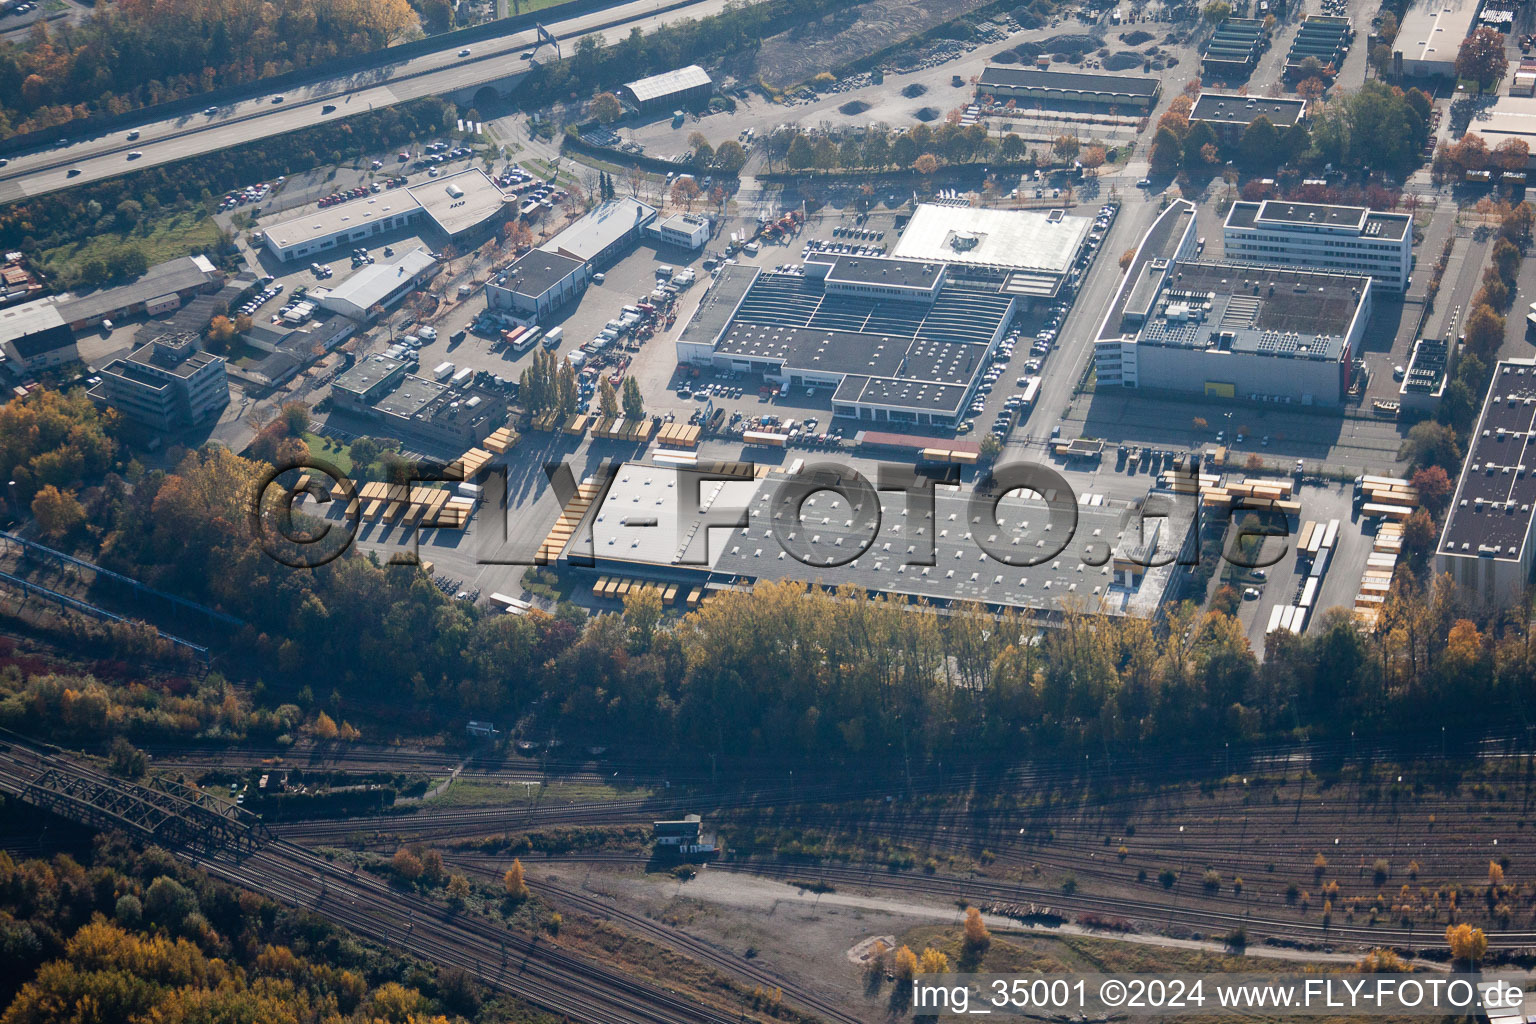 Aerial view of Warehouses and forwarding building SWS-Speditions-GmbH, Otto-street in the district Durlach in Karlsruhe in the state Baden-Wurttemberg